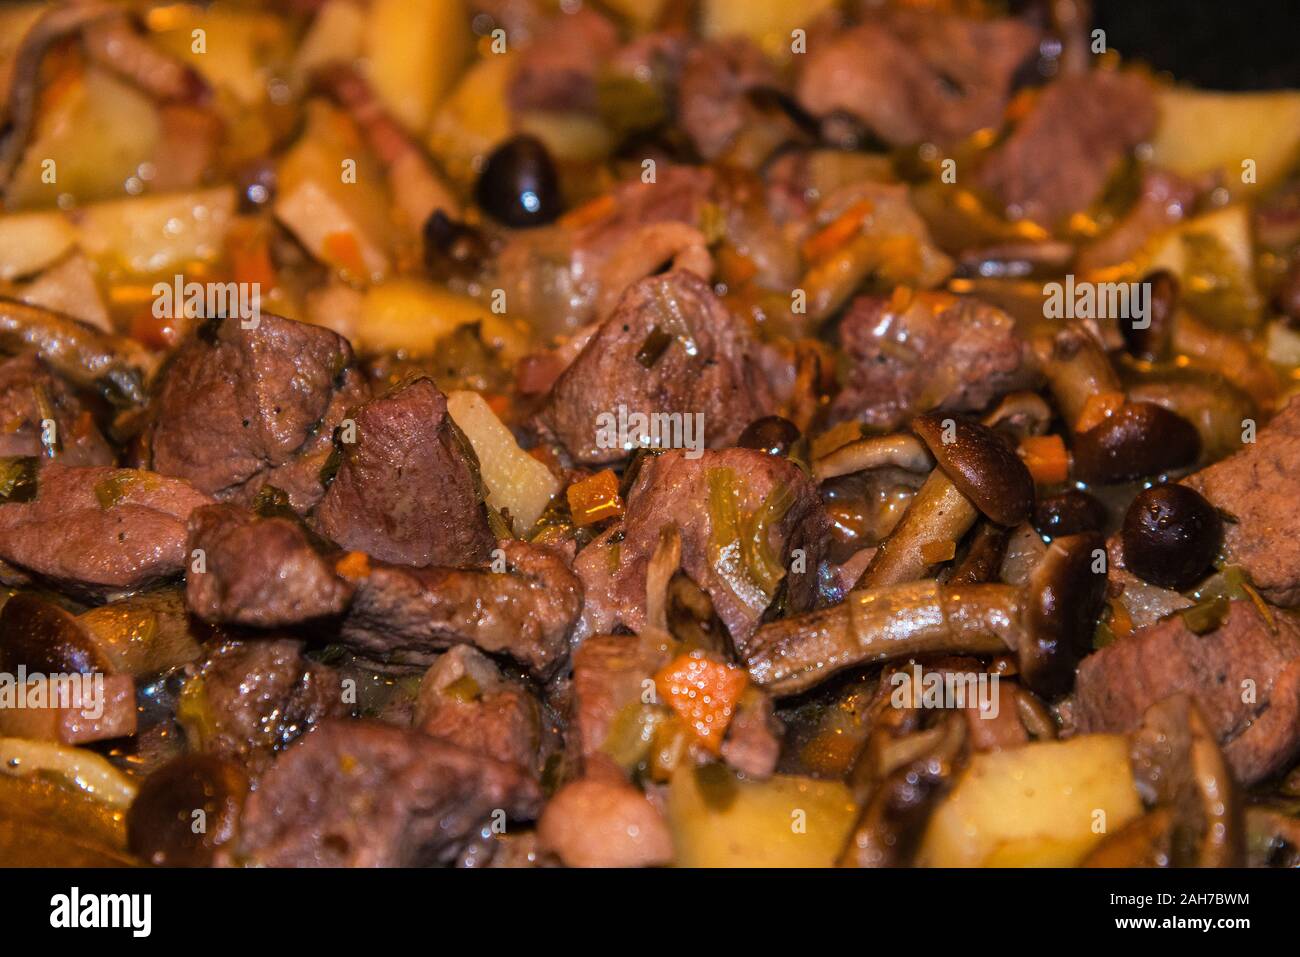 Wild boar stew with mushrooms and potatoes. Stock Photo